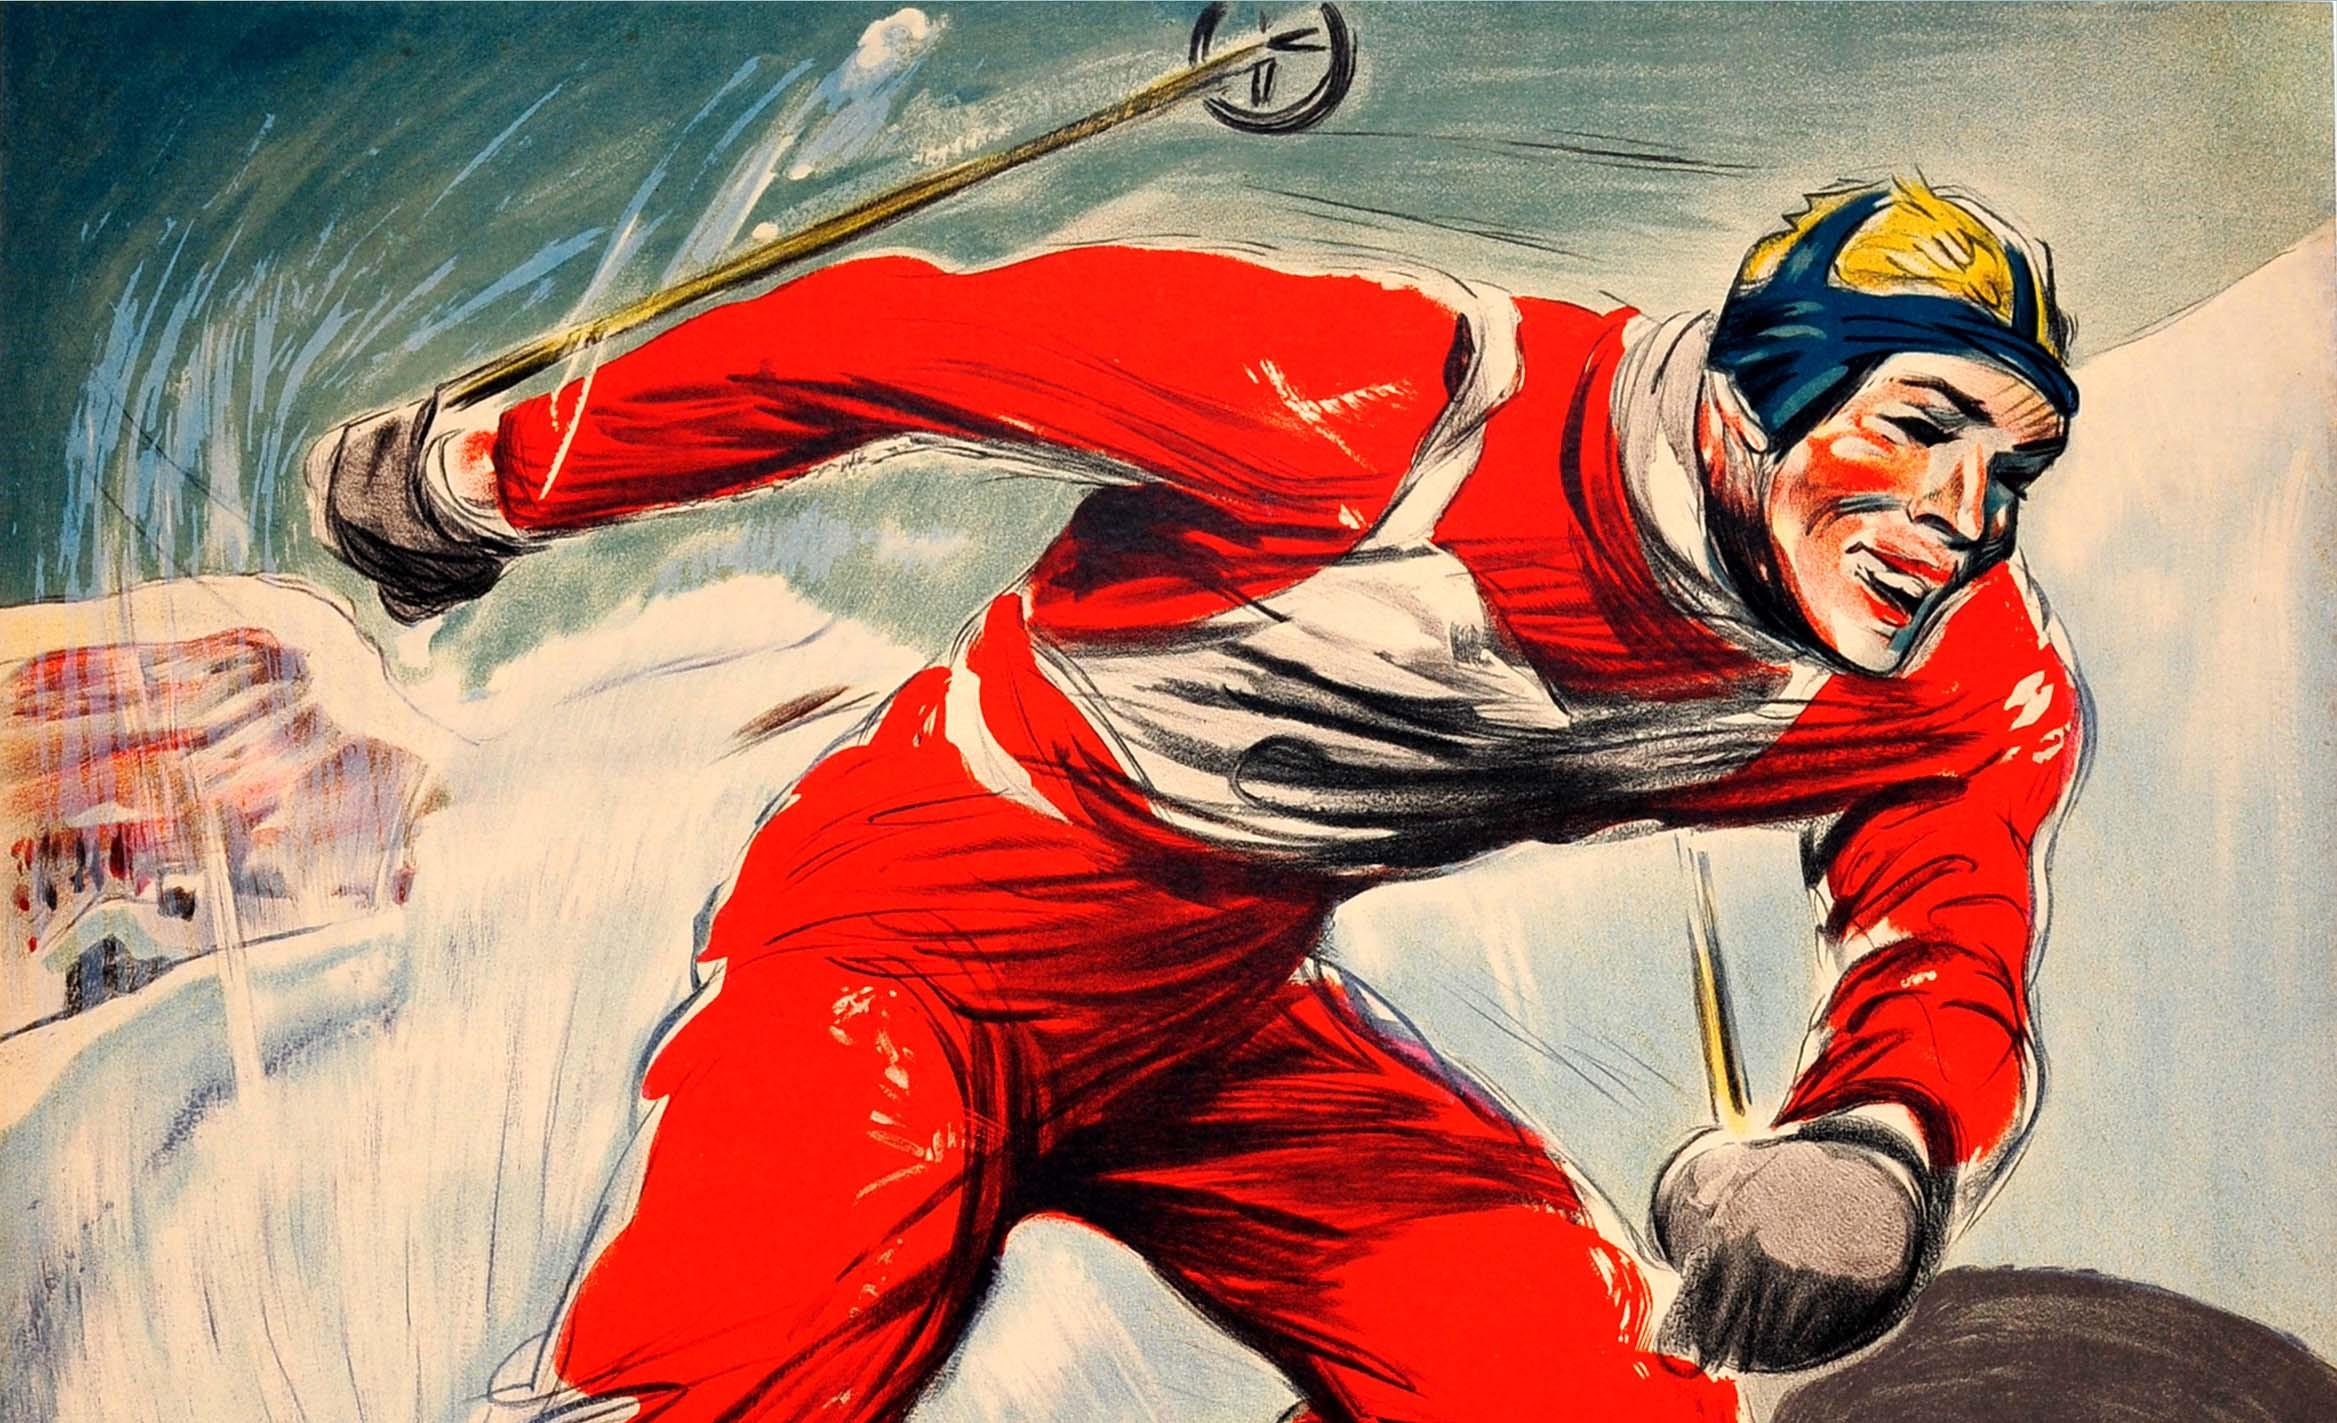 Original vintage skiing poster by Paul Ordner (1900-1969) featuring a dynamic image of a skier carving through the turns of a slalom race on a mountain piste. Mont Revard is a mountain in the Bauges mountain range in Savoie, France, home to the Le